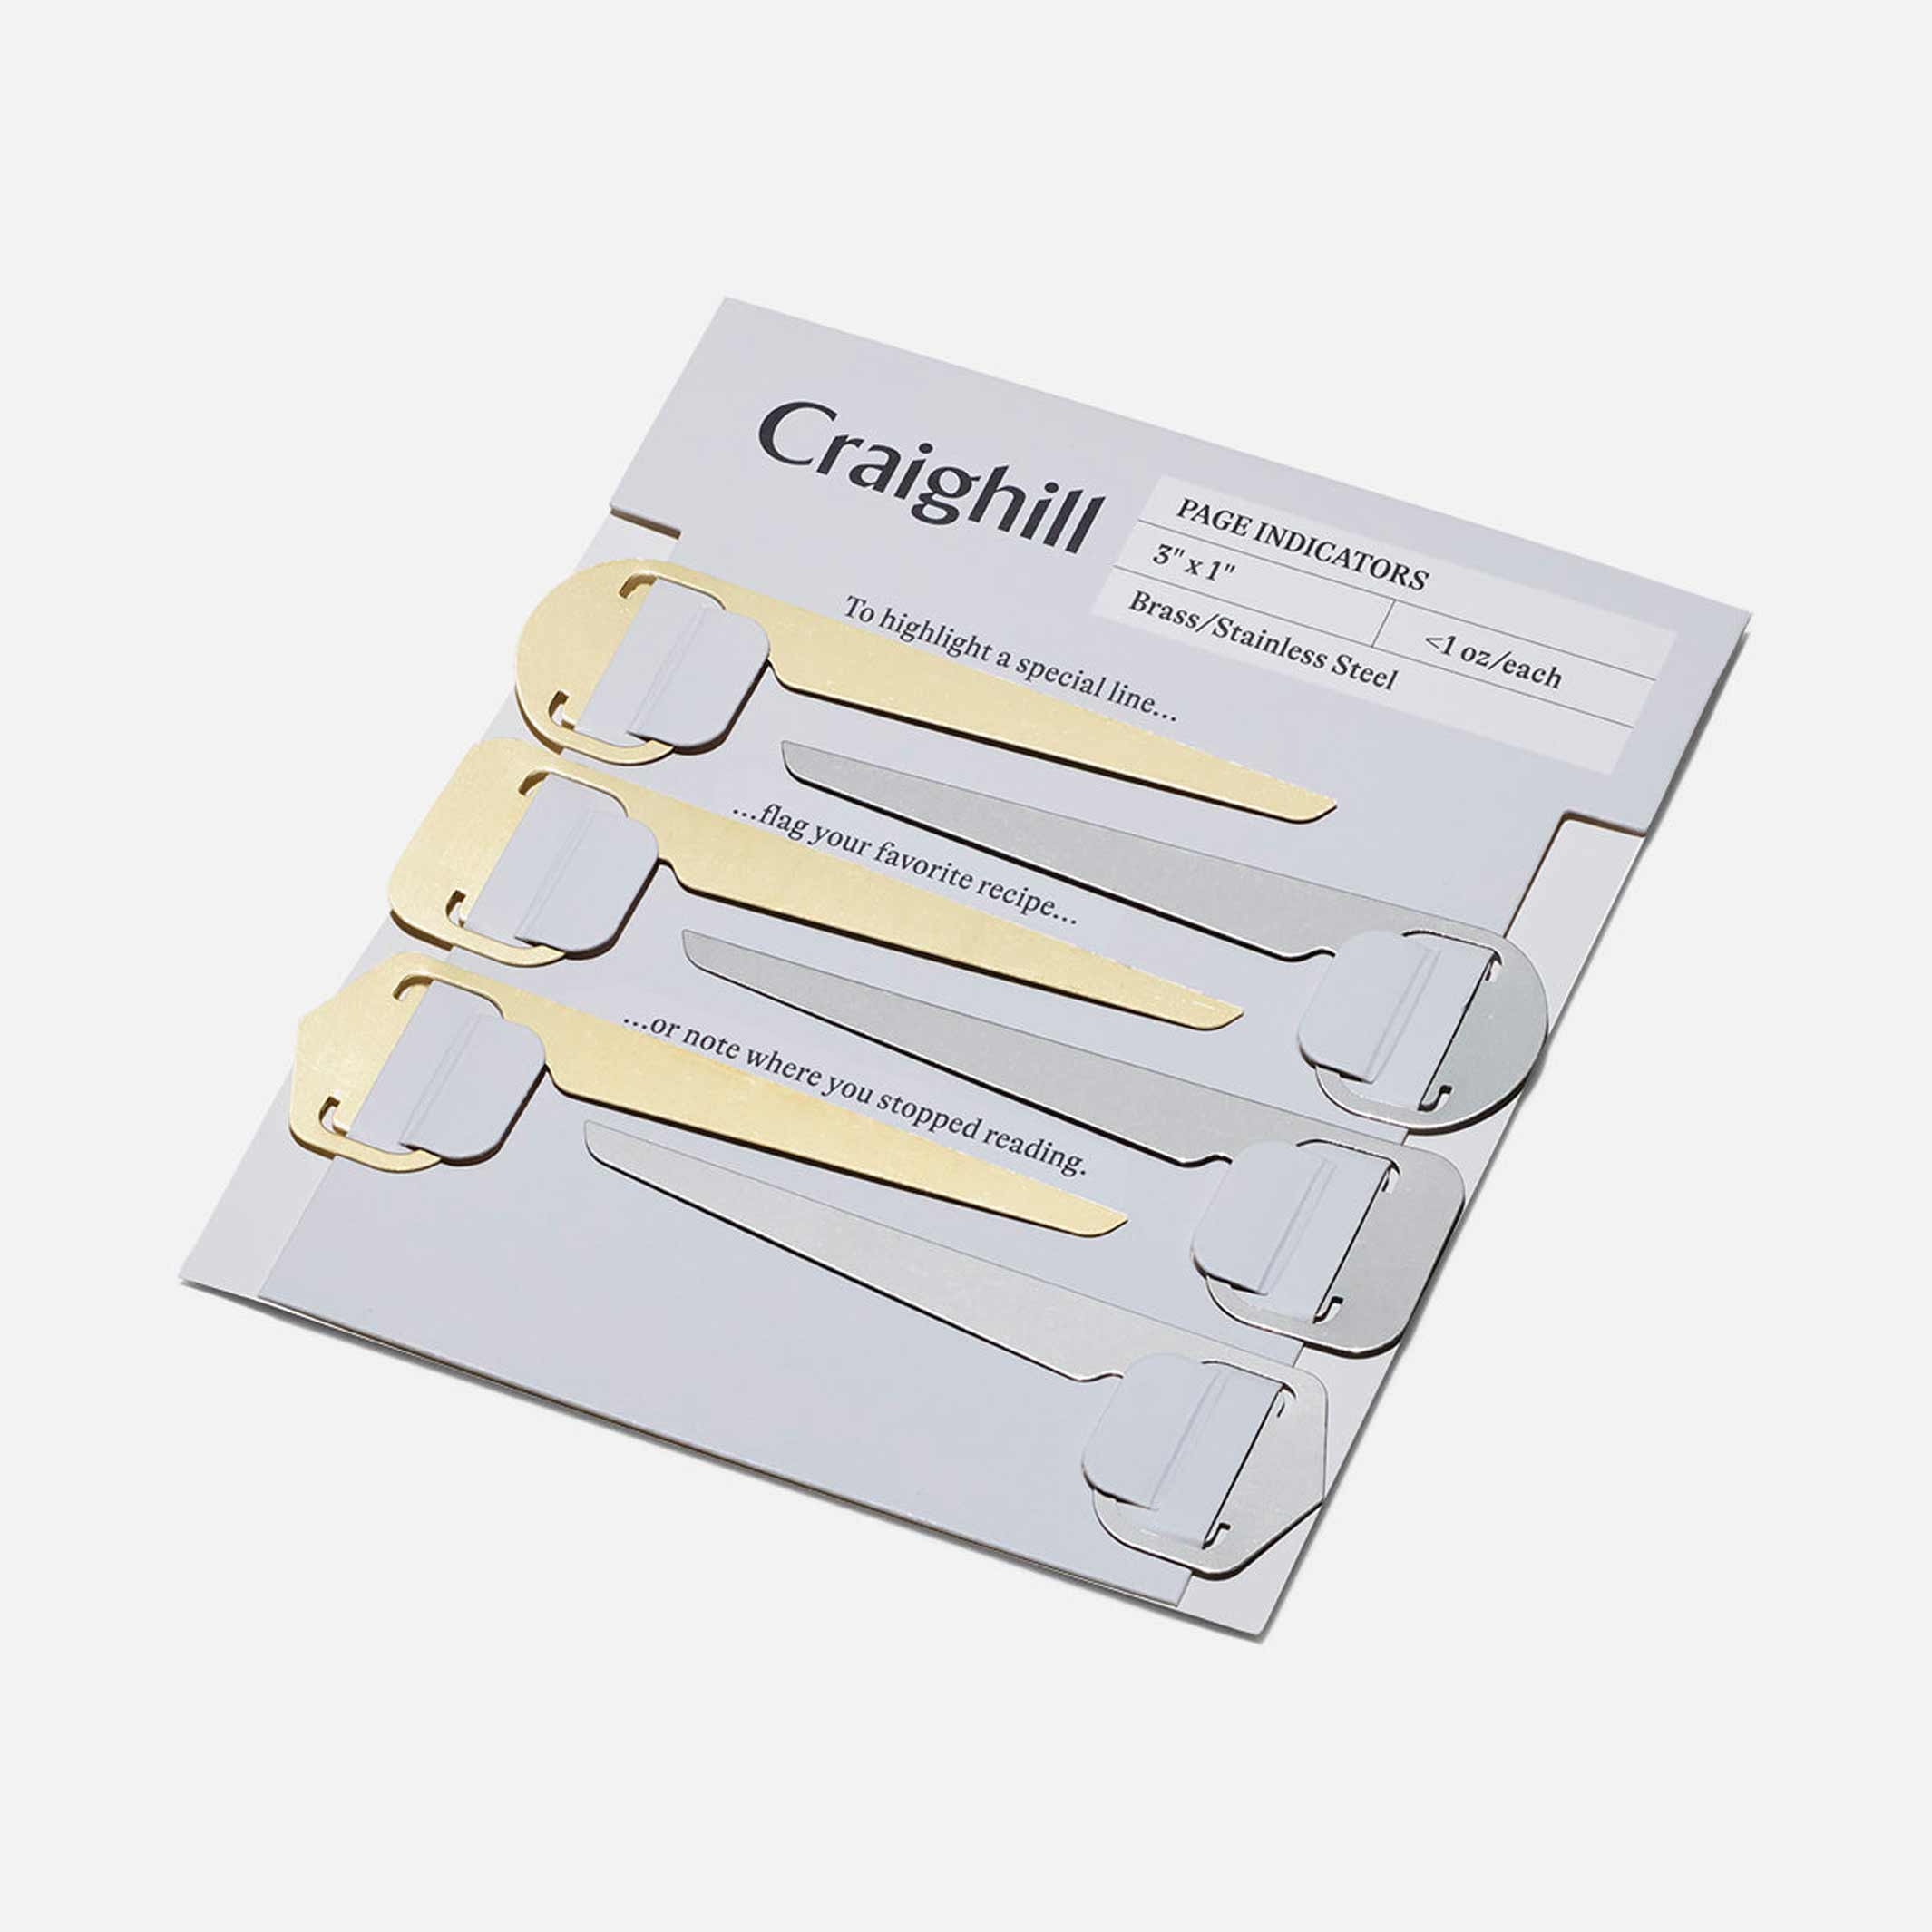 PAGE INDICATORS | Set of 6 brass & stainless BOOKMARKS | Craighill